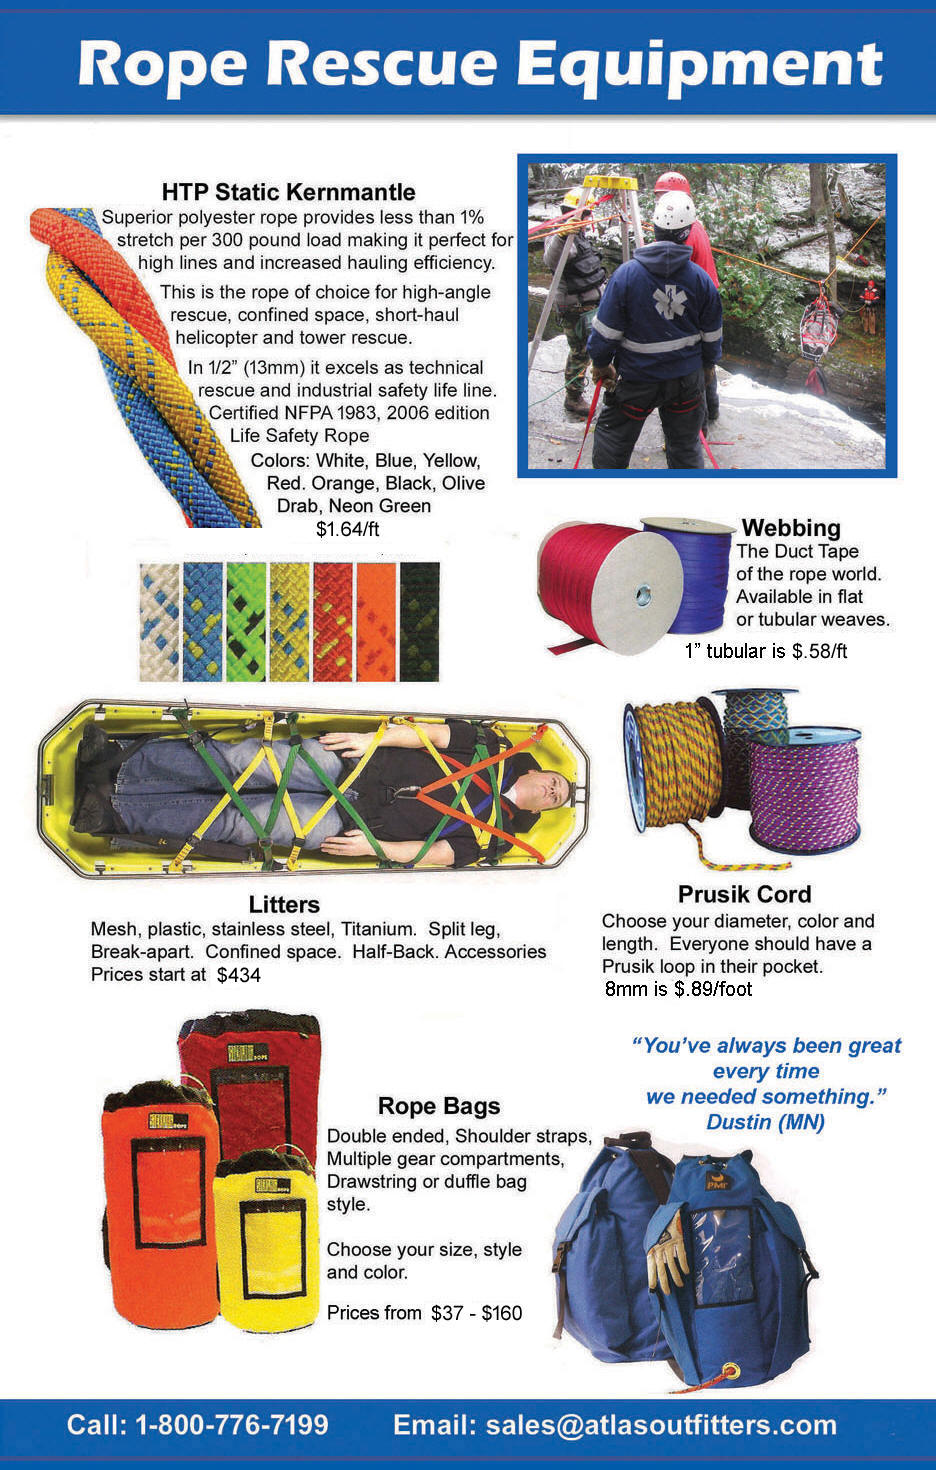 NFPA certified rescue rope, webbing, cord, bags, litters